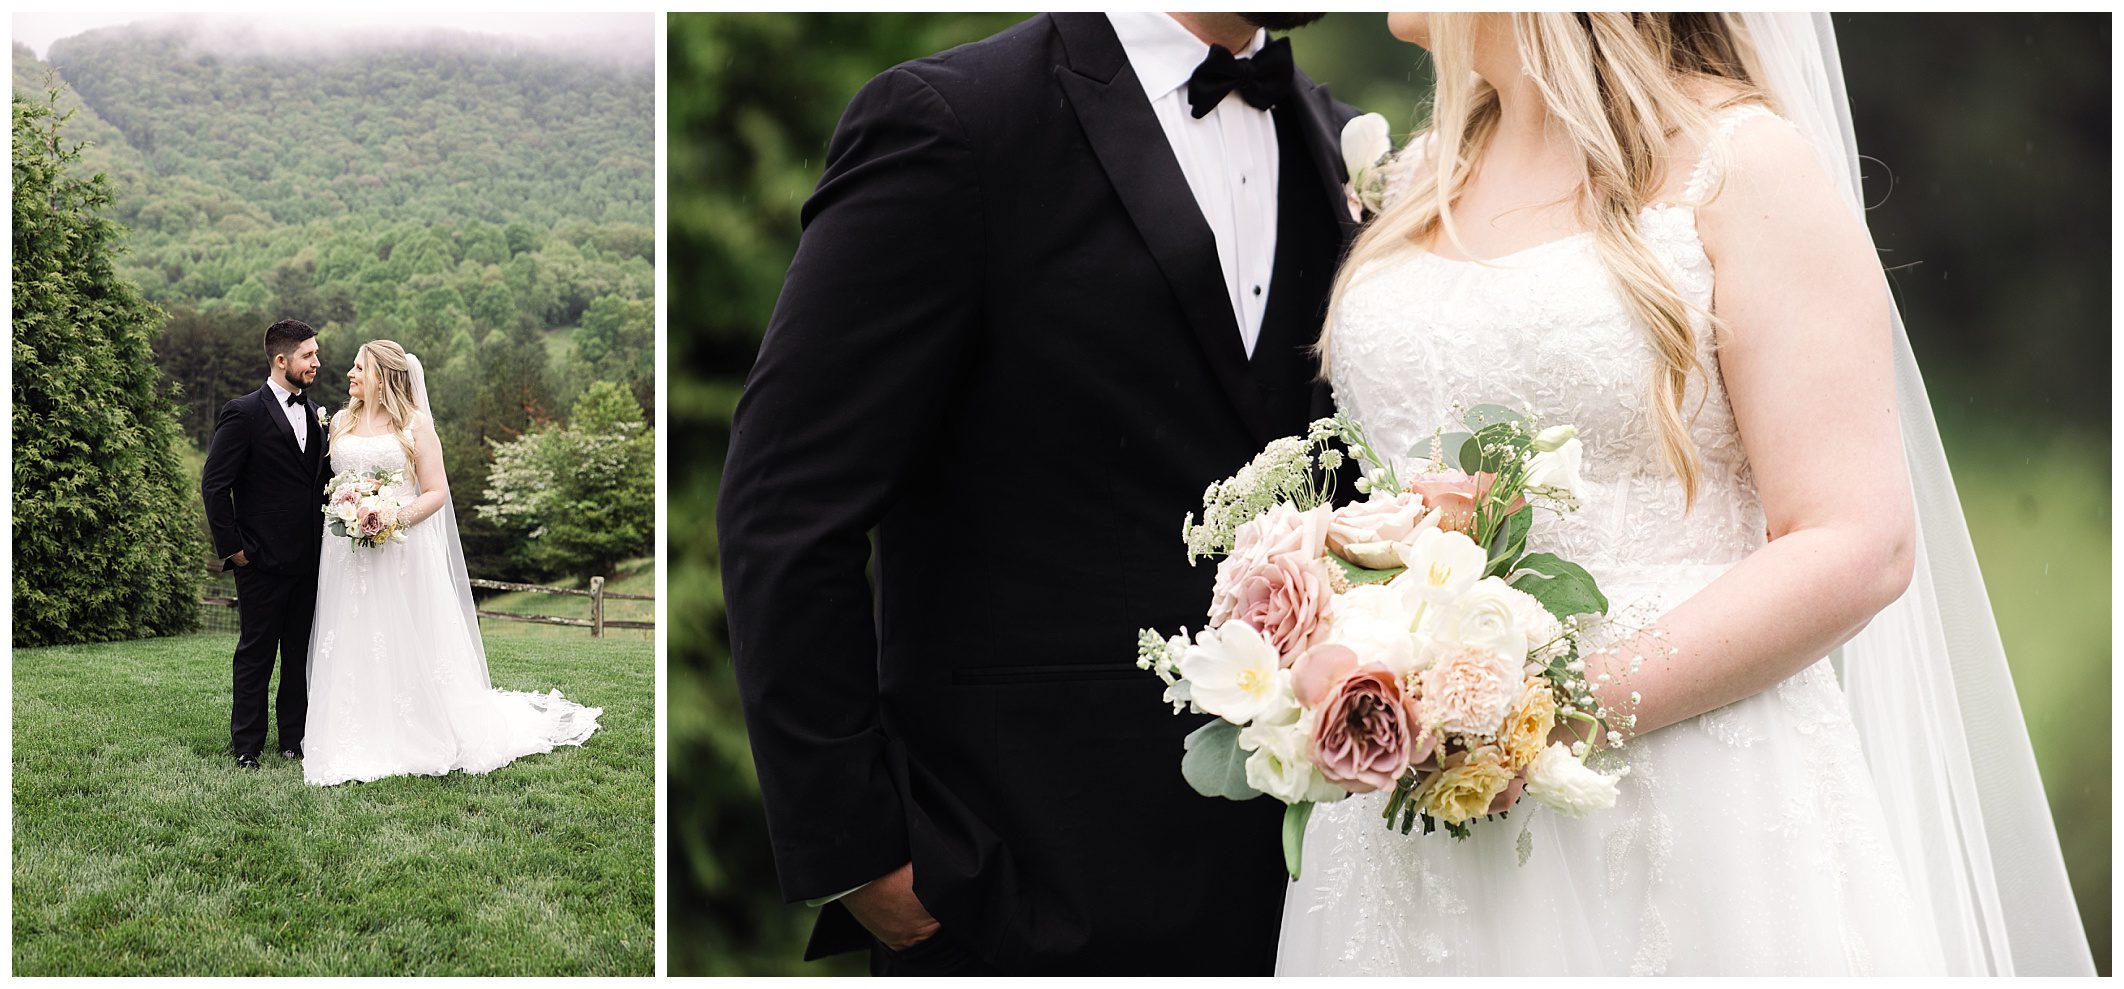 Bride and groom at a mountain wedding in Chestnut Ridge, exchanging vows; close-up of bride holding a bouquet, focusing on her gown and bouquet details.